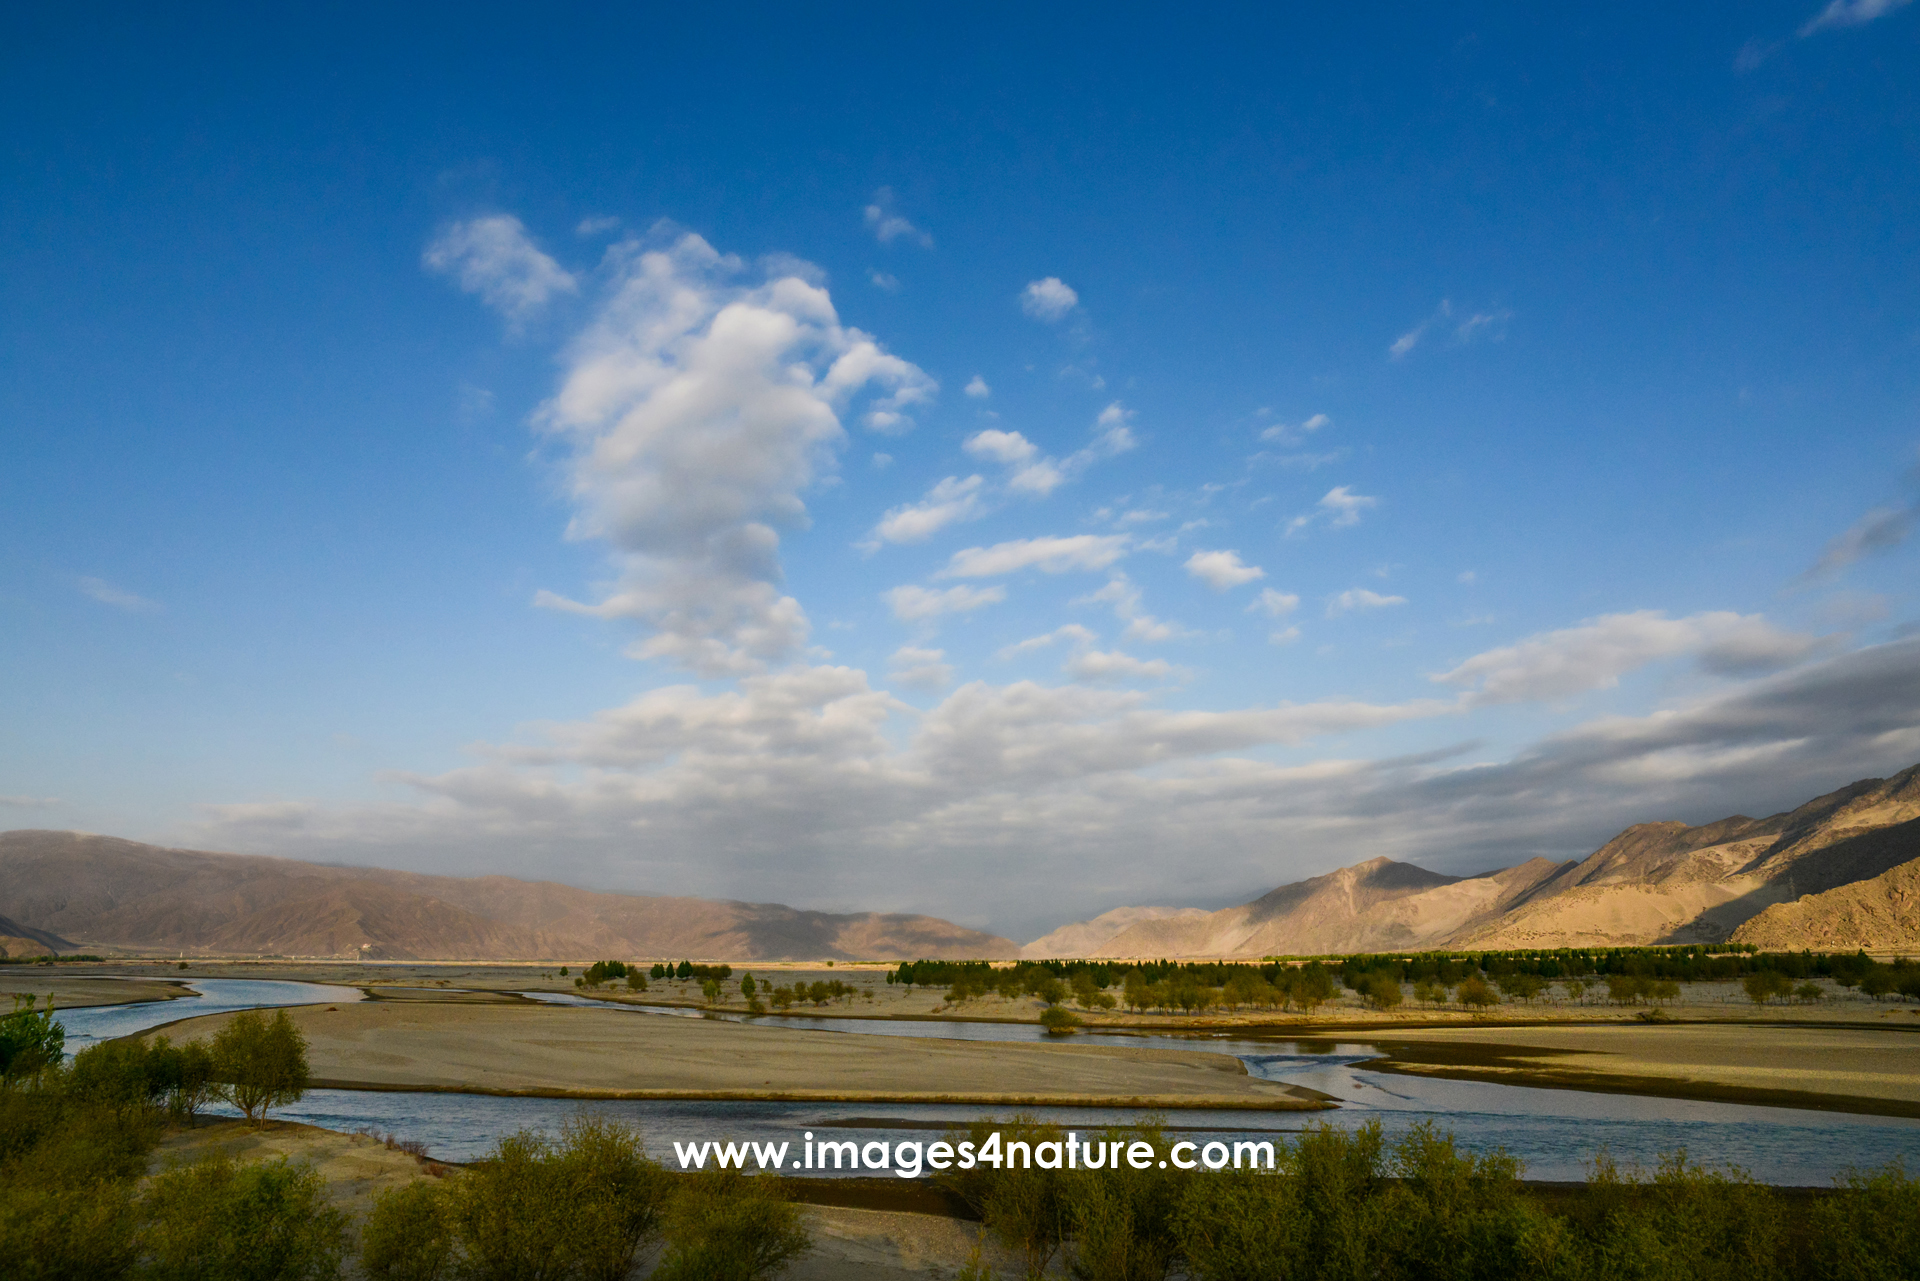 Early morning view of the river banks of Tibet's Yarlung Zangbo river in mountain valley